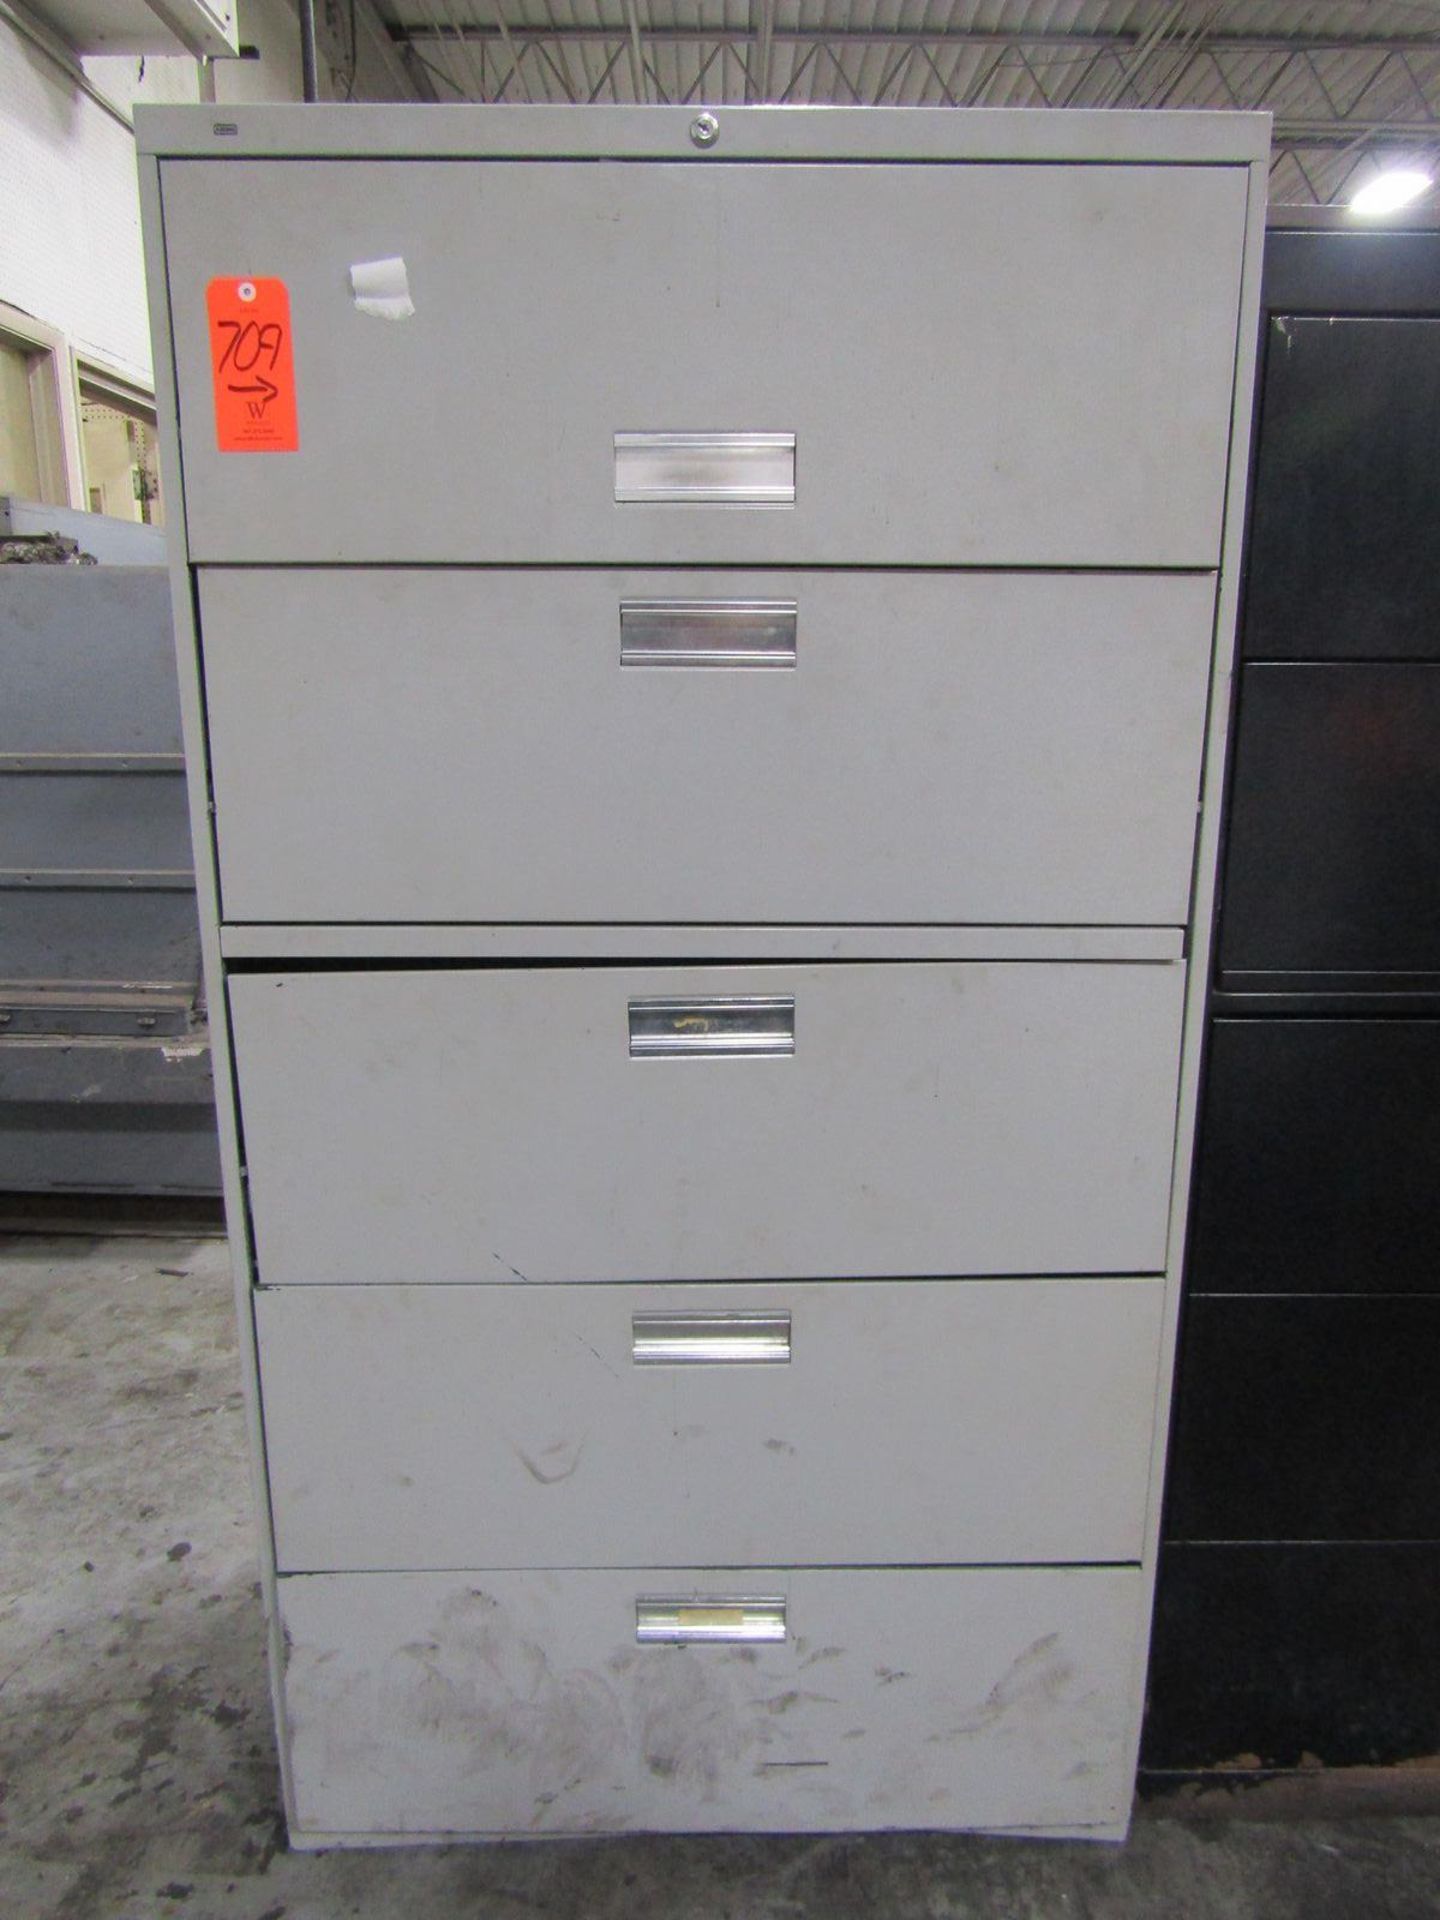 Lot - Shop Furniture, to Include: (2) 5-Drawer Lateral Filing Cabinets, (1) 4-Drawer Lateral - Image 12 of 12